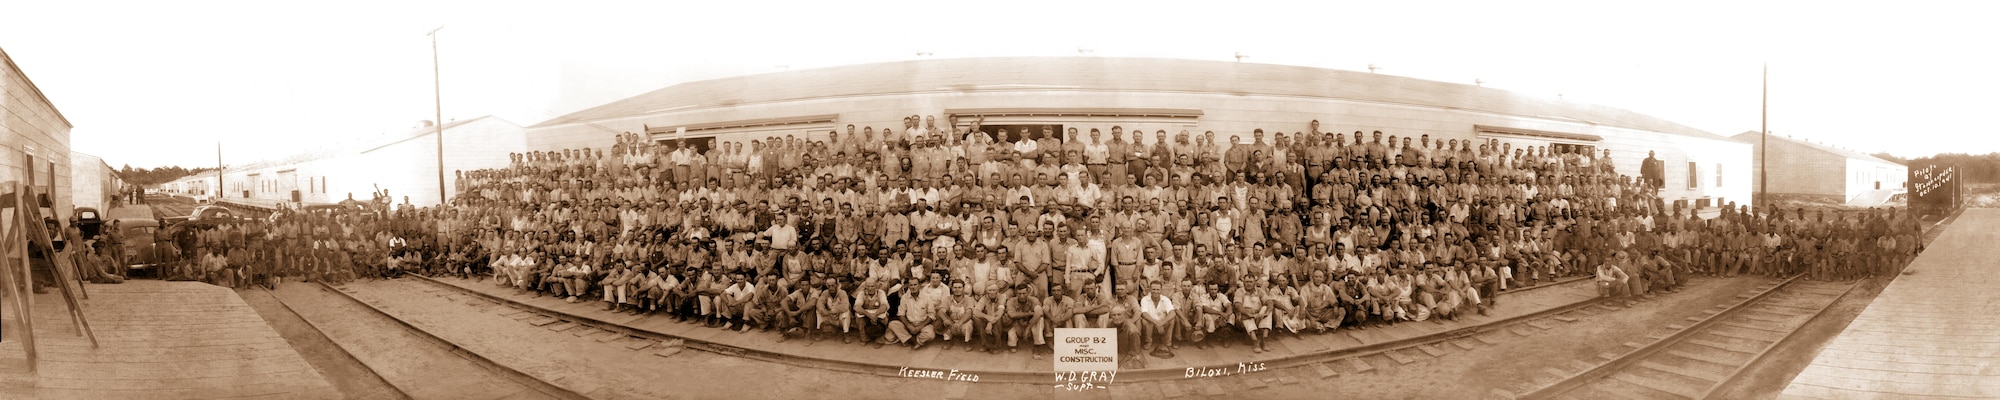 Members of Group B-2 and Misc. Construction pose for a photo at Keesler Field, Miss., Oct. 10, 1941. (Photo by Stone Cipher)
